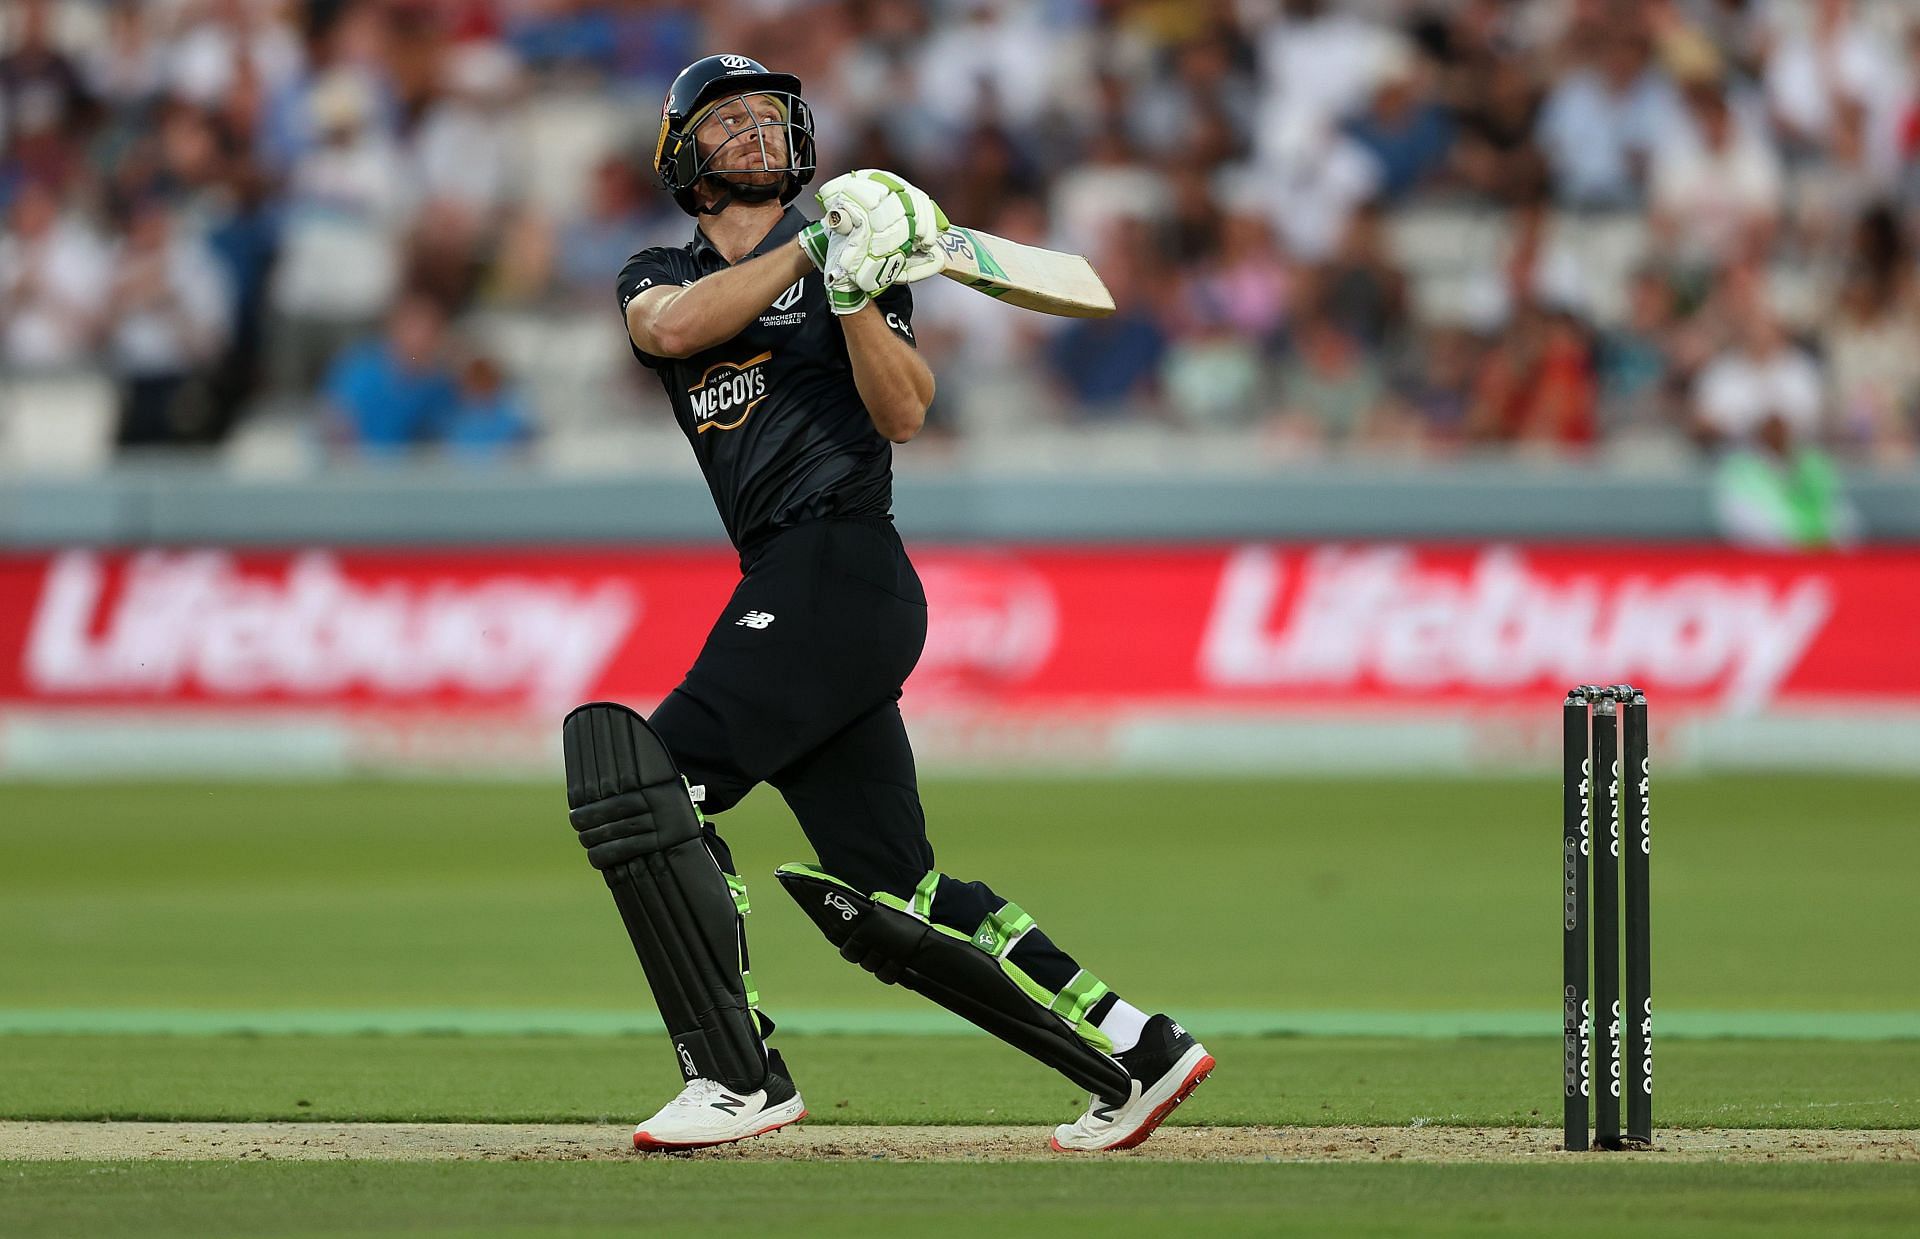 Jos Buttler in action during an earlier match. (Pic credits: Getty Images)